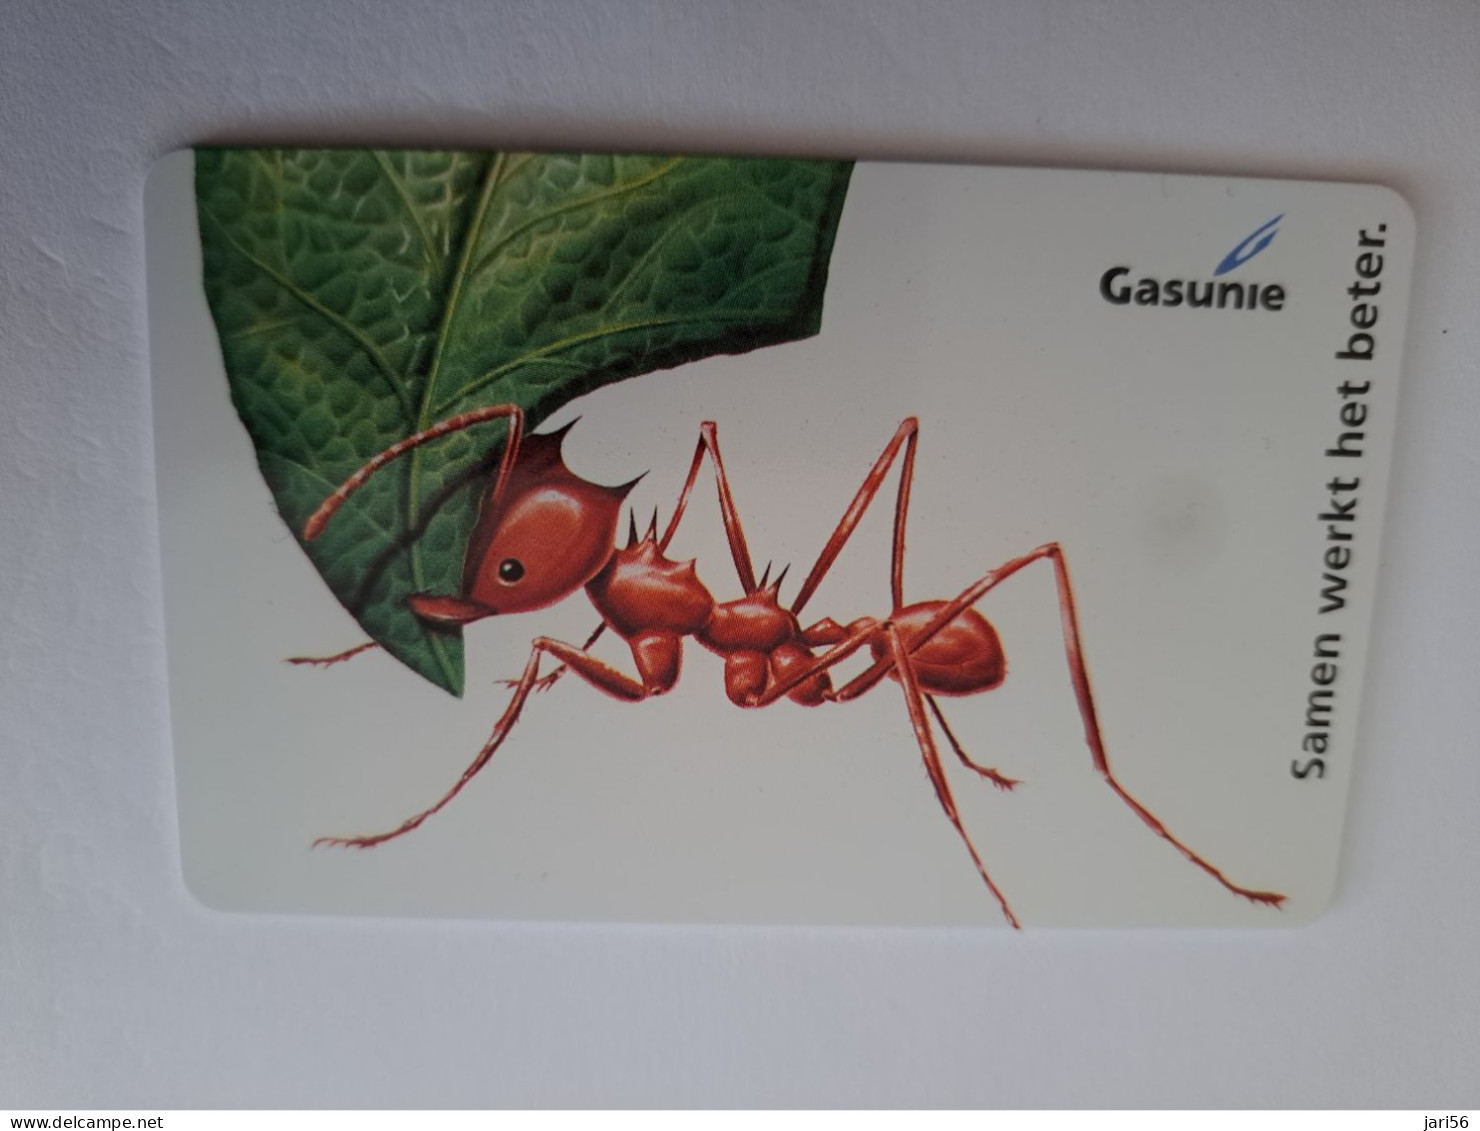 NETHERLANDS / CHIP ADVERTISING CARD/ HFL 7,50  / GASUNIE / ANT ANIMAL   /     CRE 232.03** 14595** - Privat